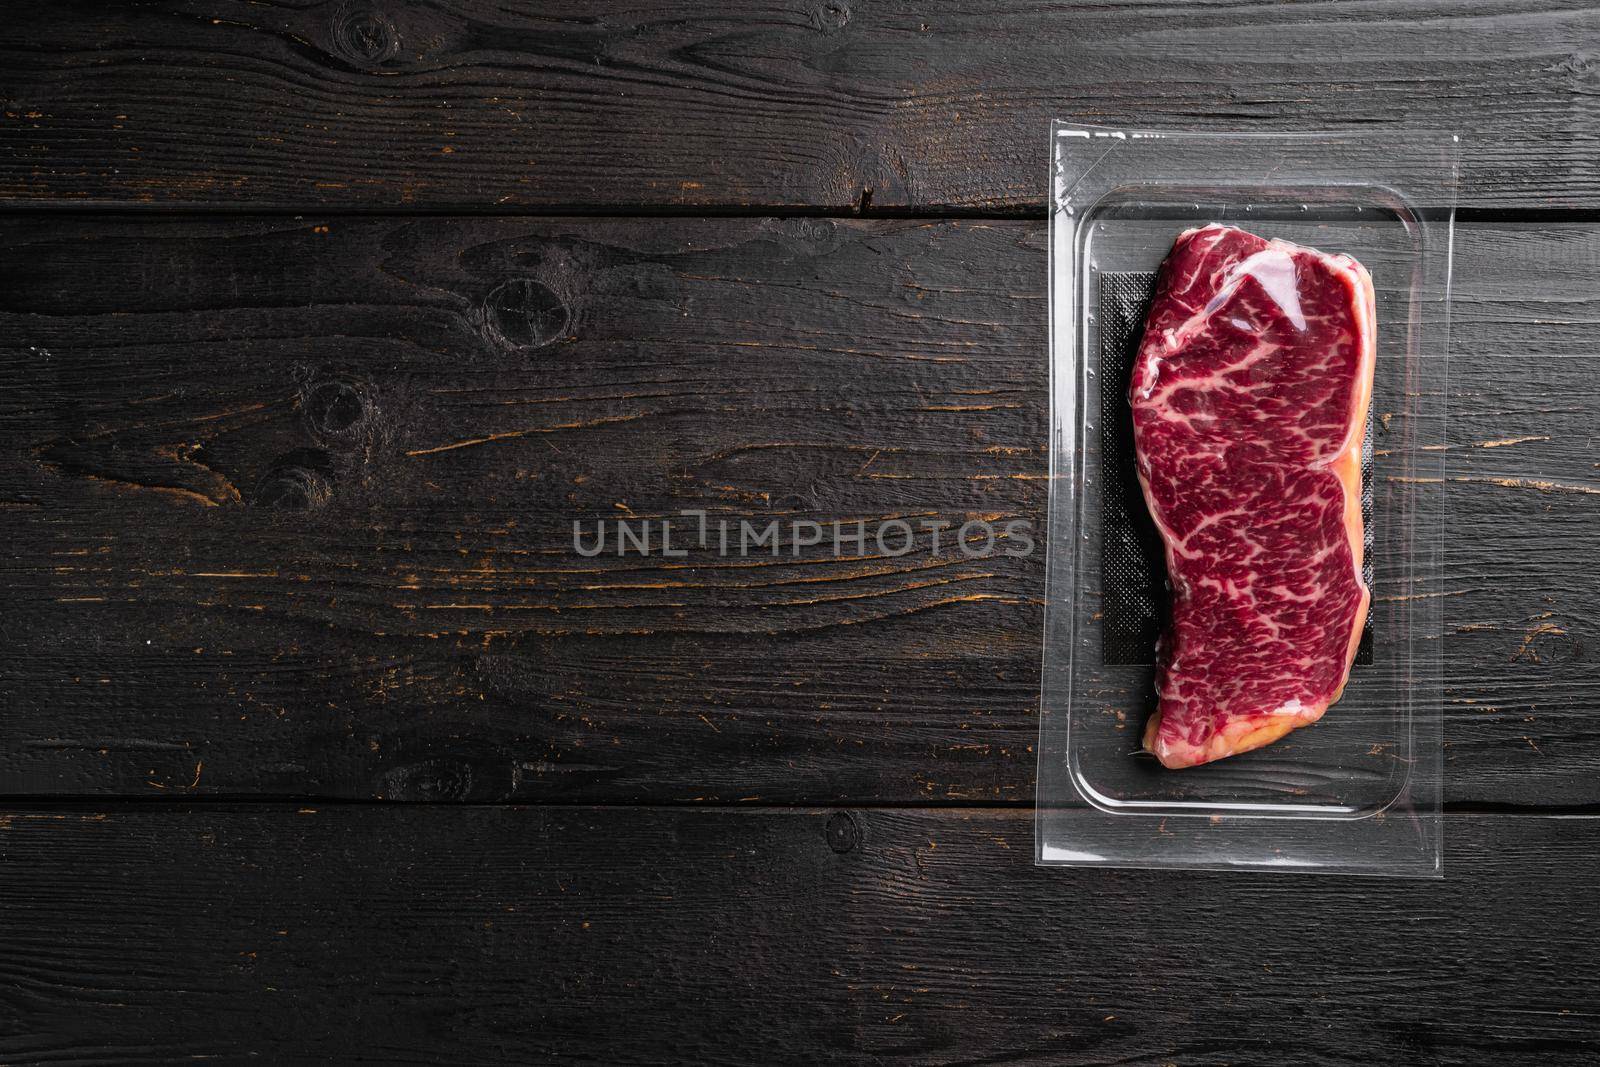 Raw Striploin marbled beef steak vacuum Packed set, on black wooden table background, top view flat lay, with copy space for text